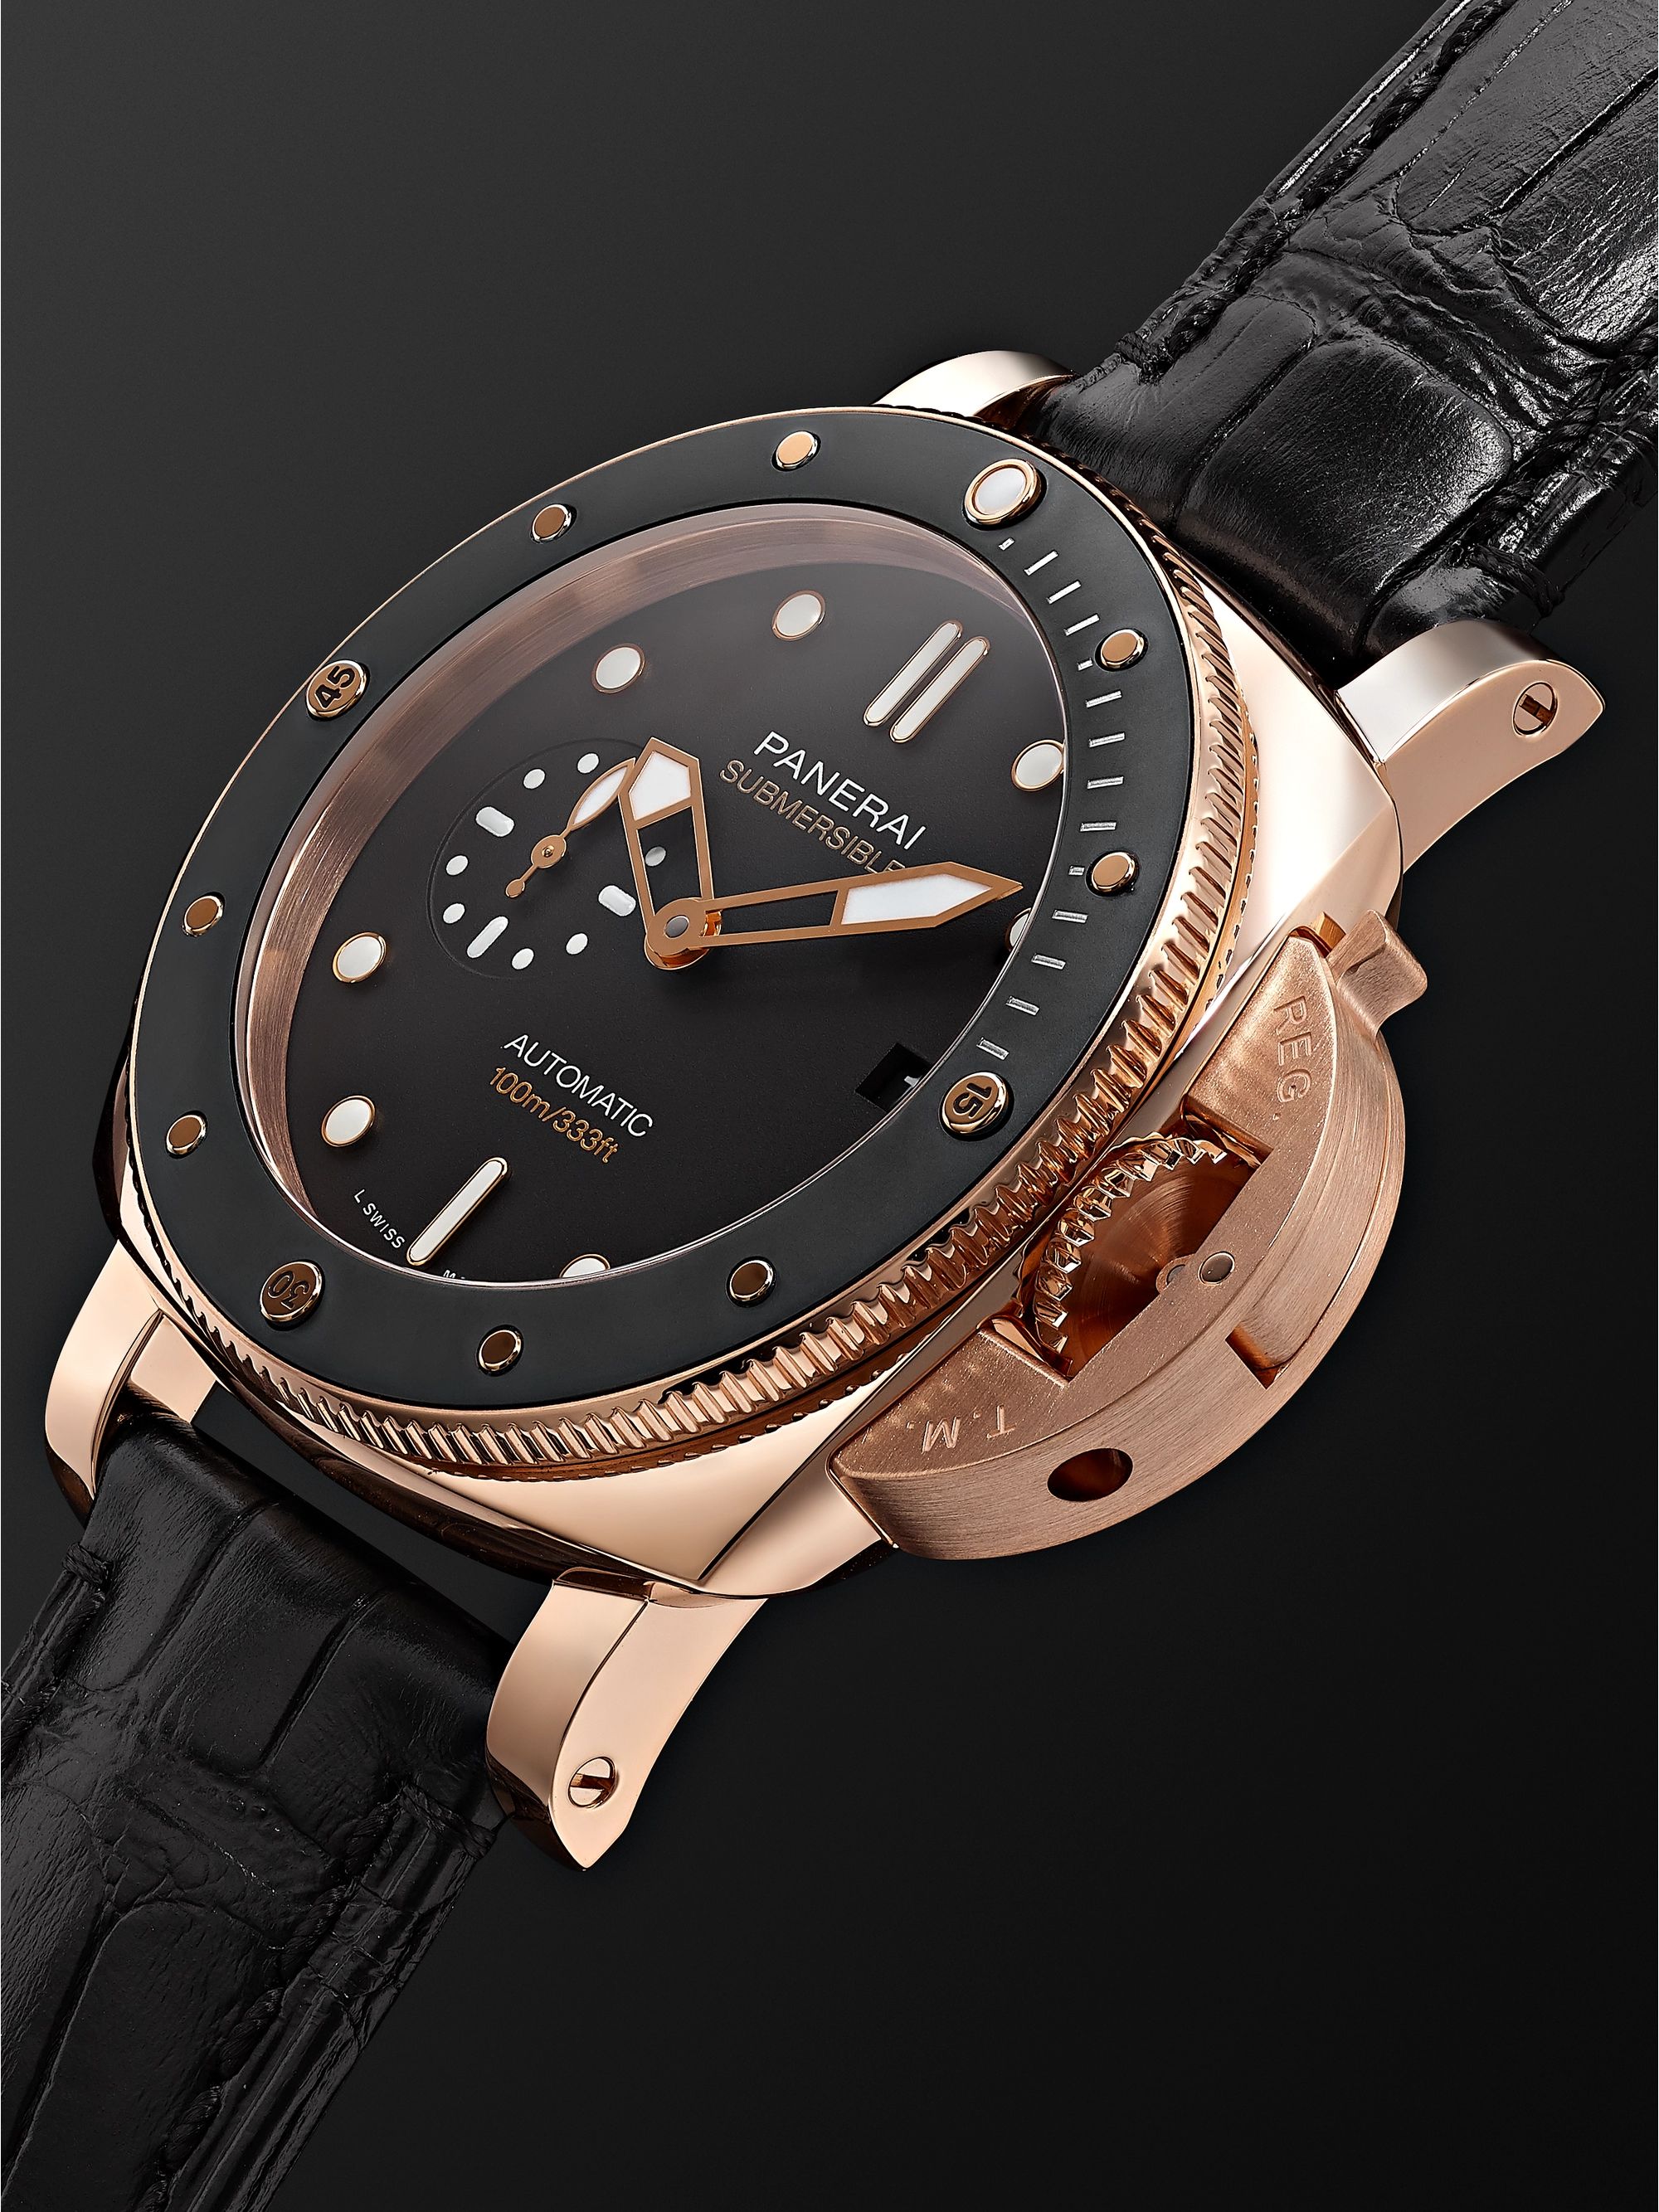 PANERAI Submersible Automatic 42mm Goldtech and Alligator Watch, Ref. No. PAM00974